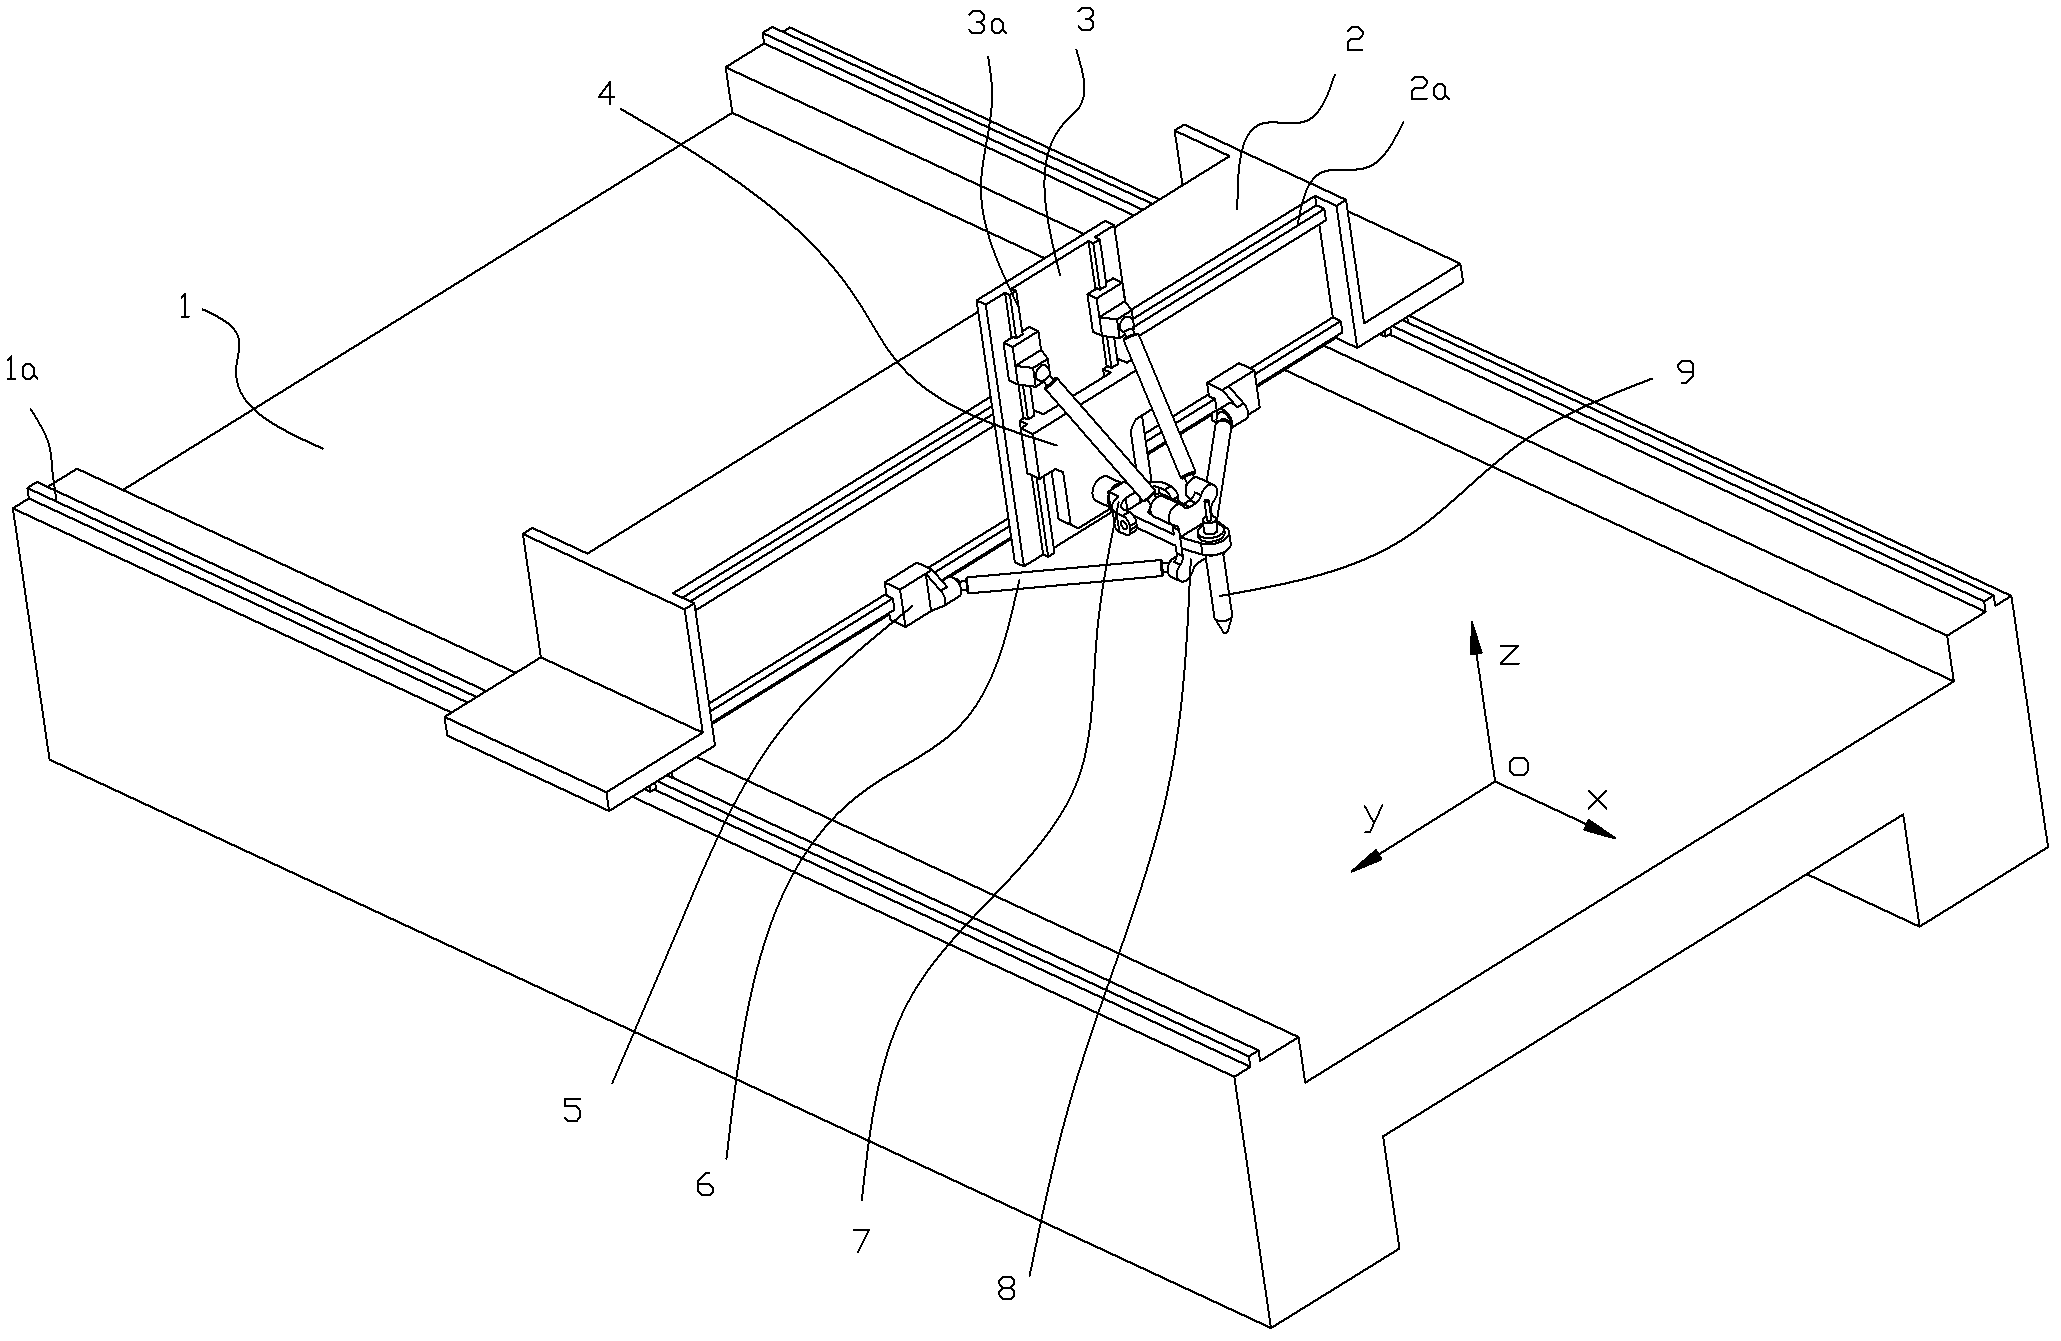 Three-dimensional five-axis computerized numerical control laser cutting machine